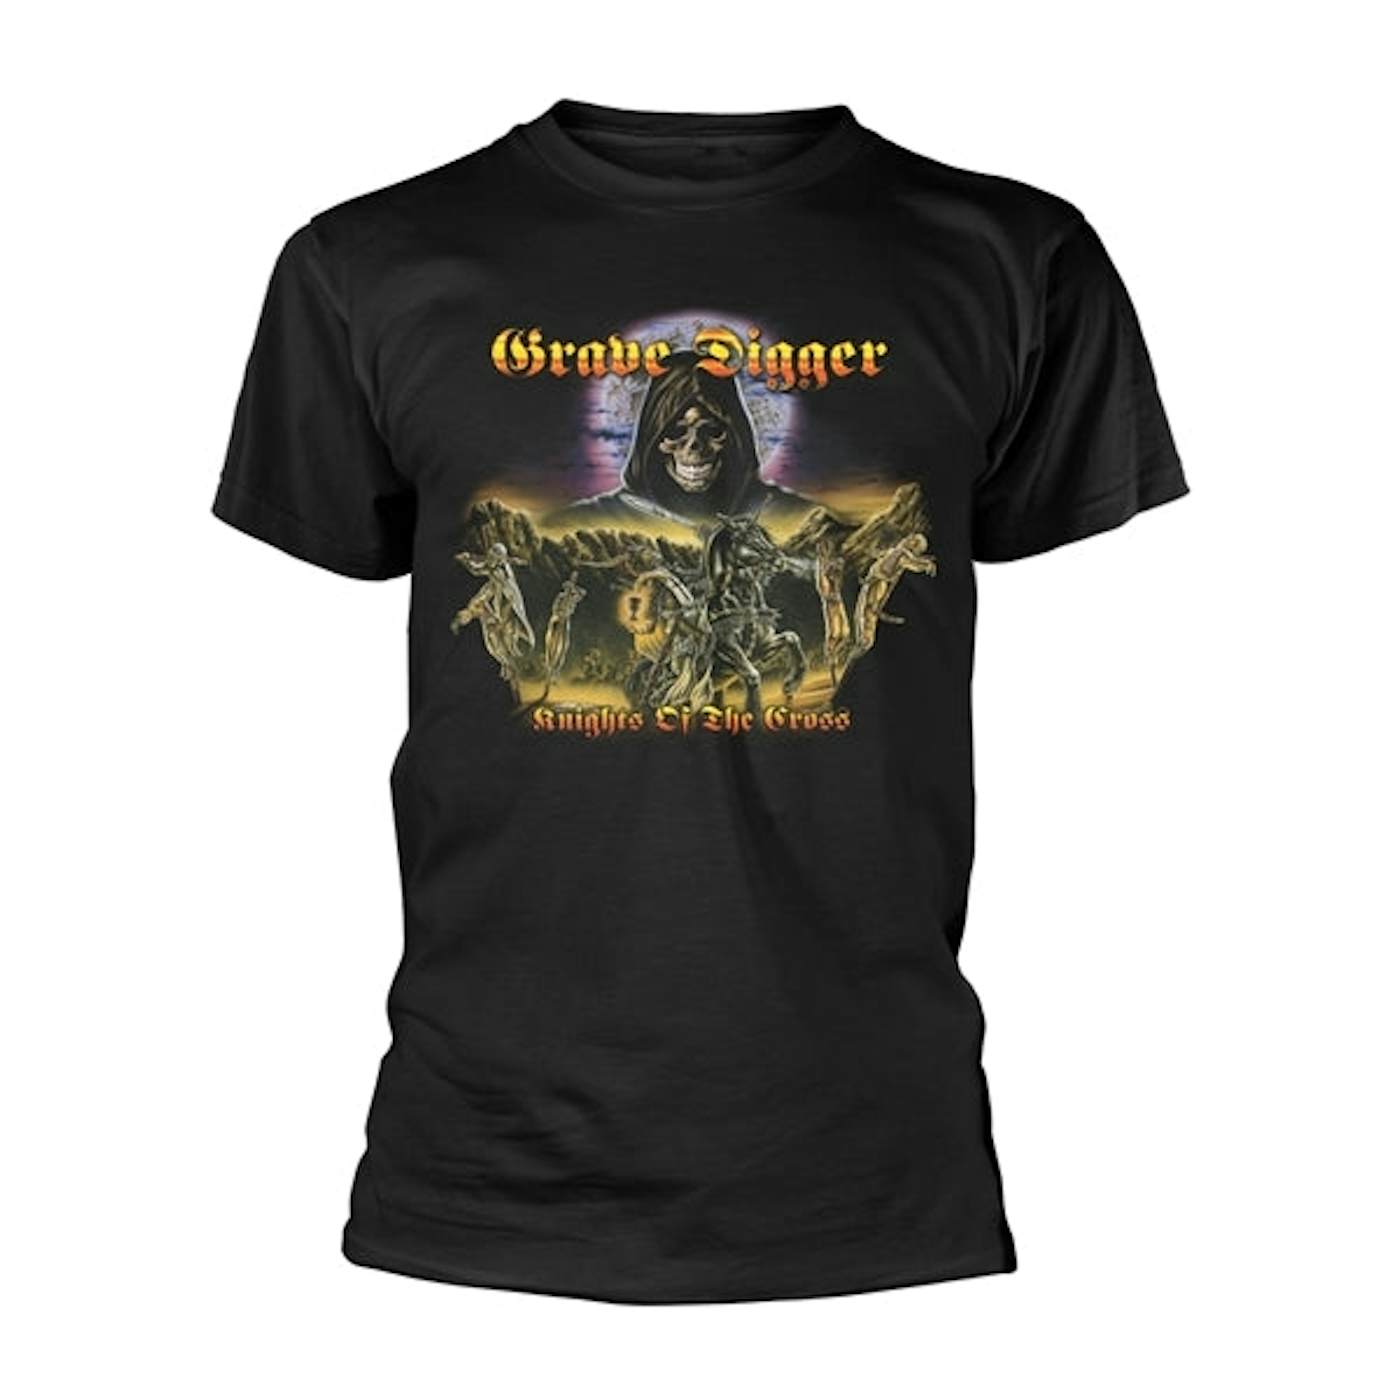 Grave Digger T Shirt - Knights Of The Cross